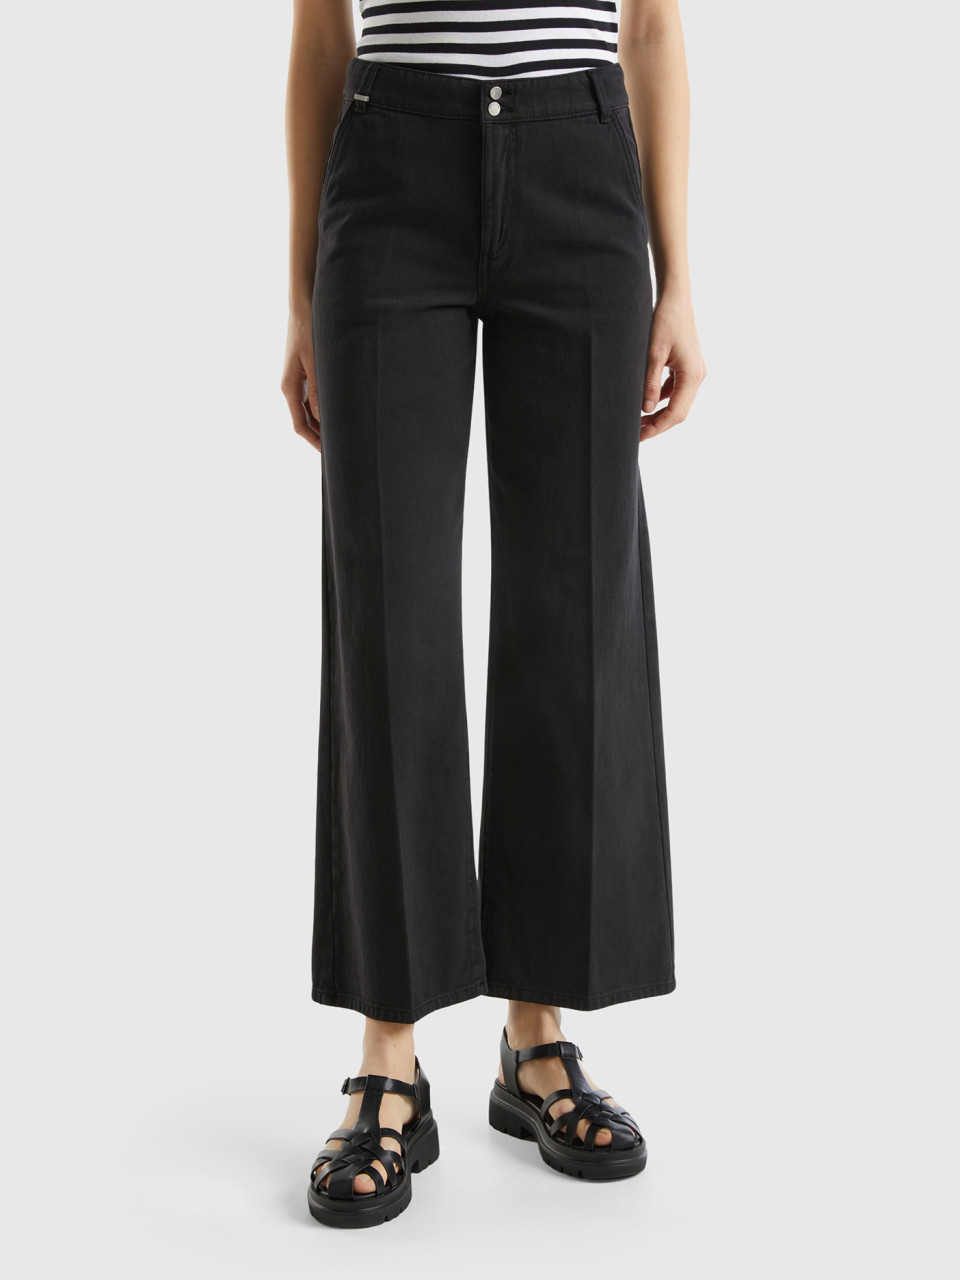 Benetton, High-waisted Trousers With Wide Leg, Black, Women